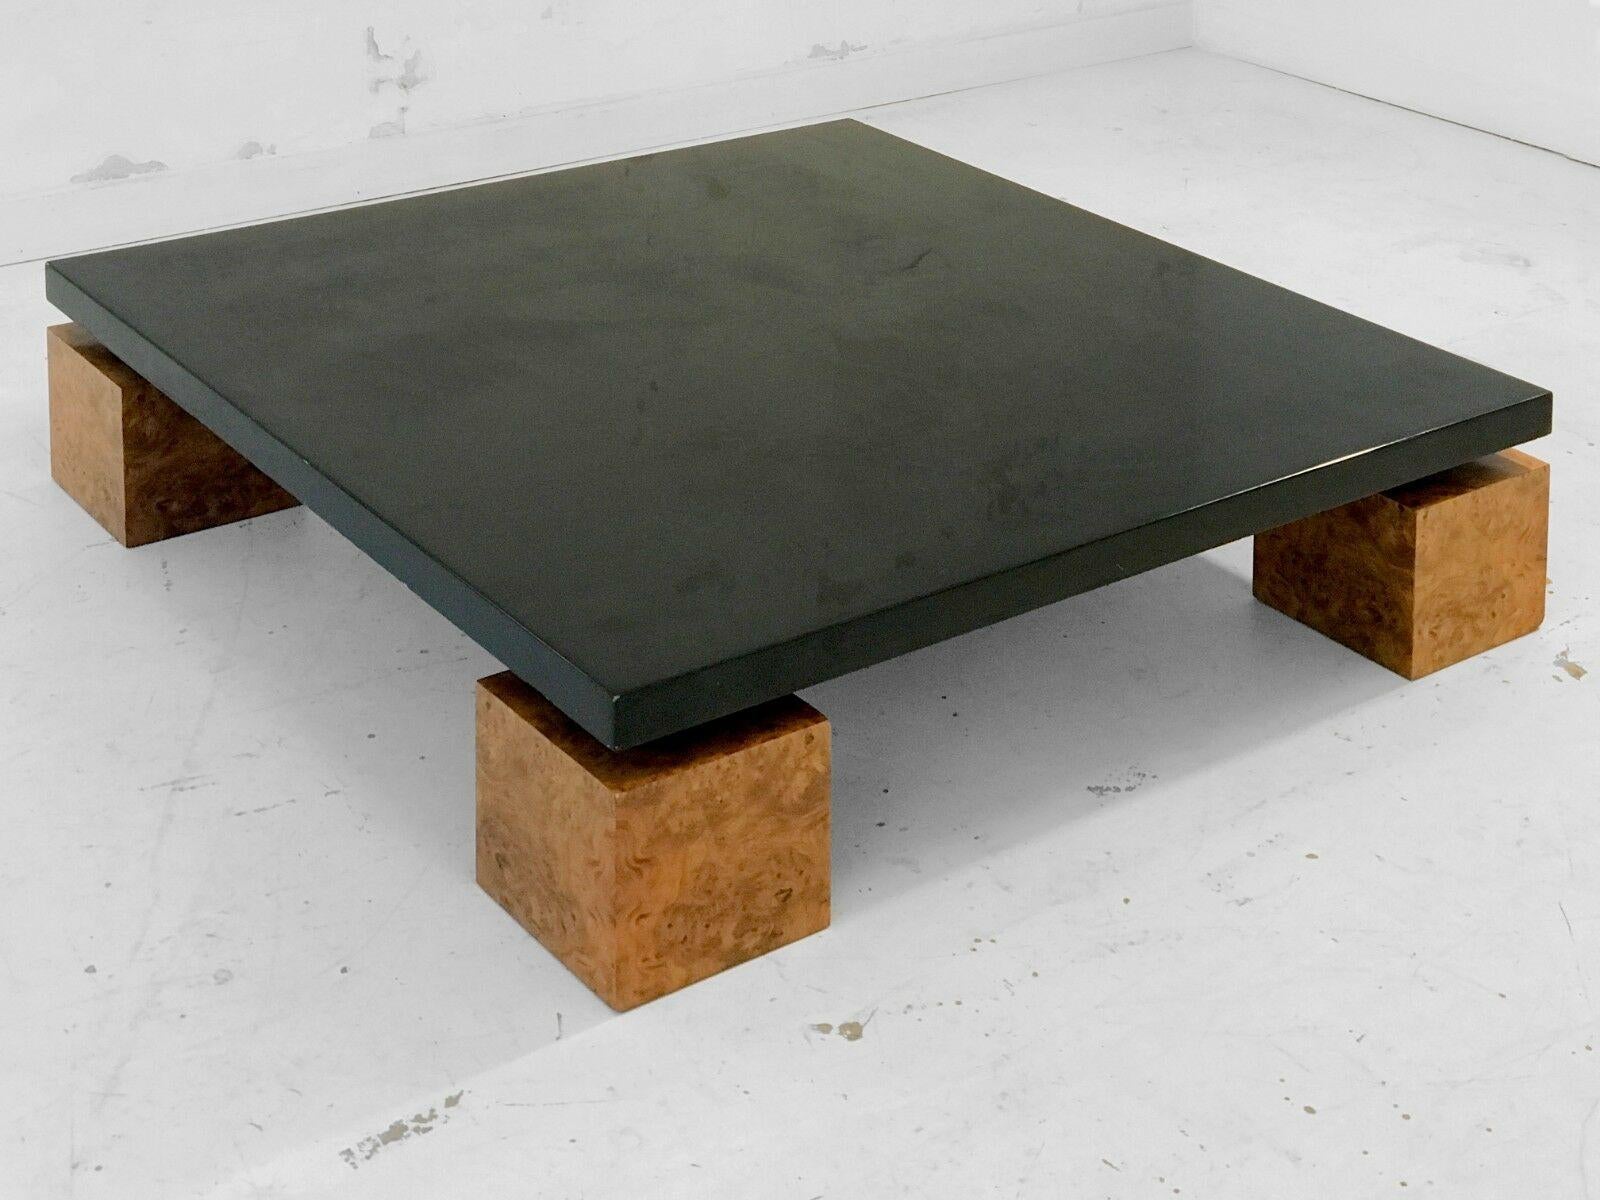 This very large square coffee table by Nadine Charteret is a composition of 4 cubic legs wood plated in elm burl, and a large black-lacquered wooden tray. The spirit of seventies, but also 1980's Memphis Italian style characterizes this piece made